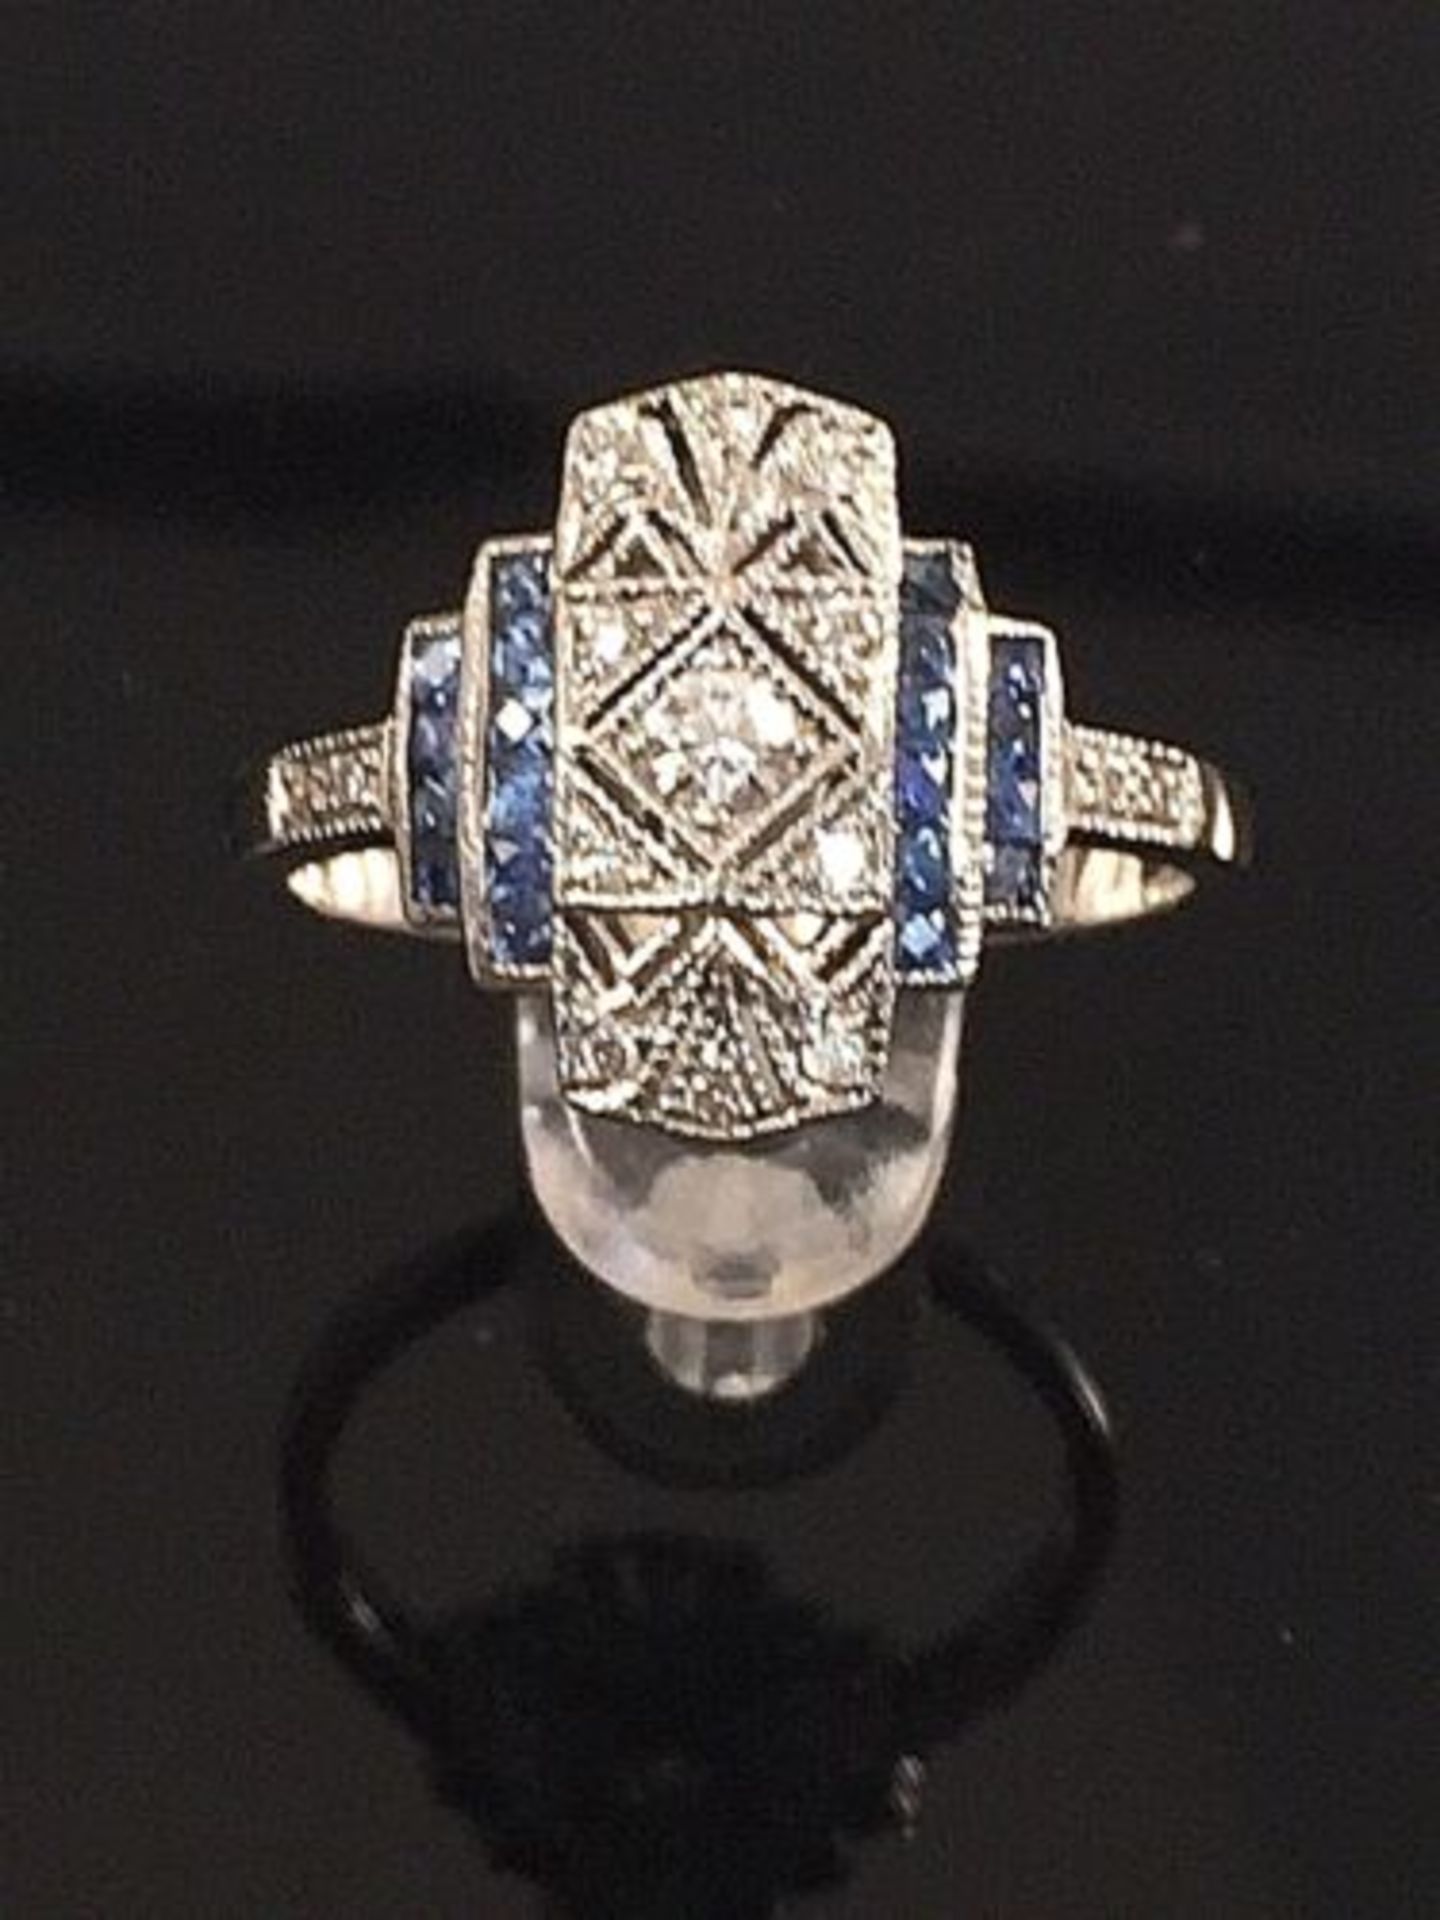 DIAMOND AND SAPPHIRE ART NOUVEAU STYLE DRESS RING IN WHITE GOLD - Image 5 of 6